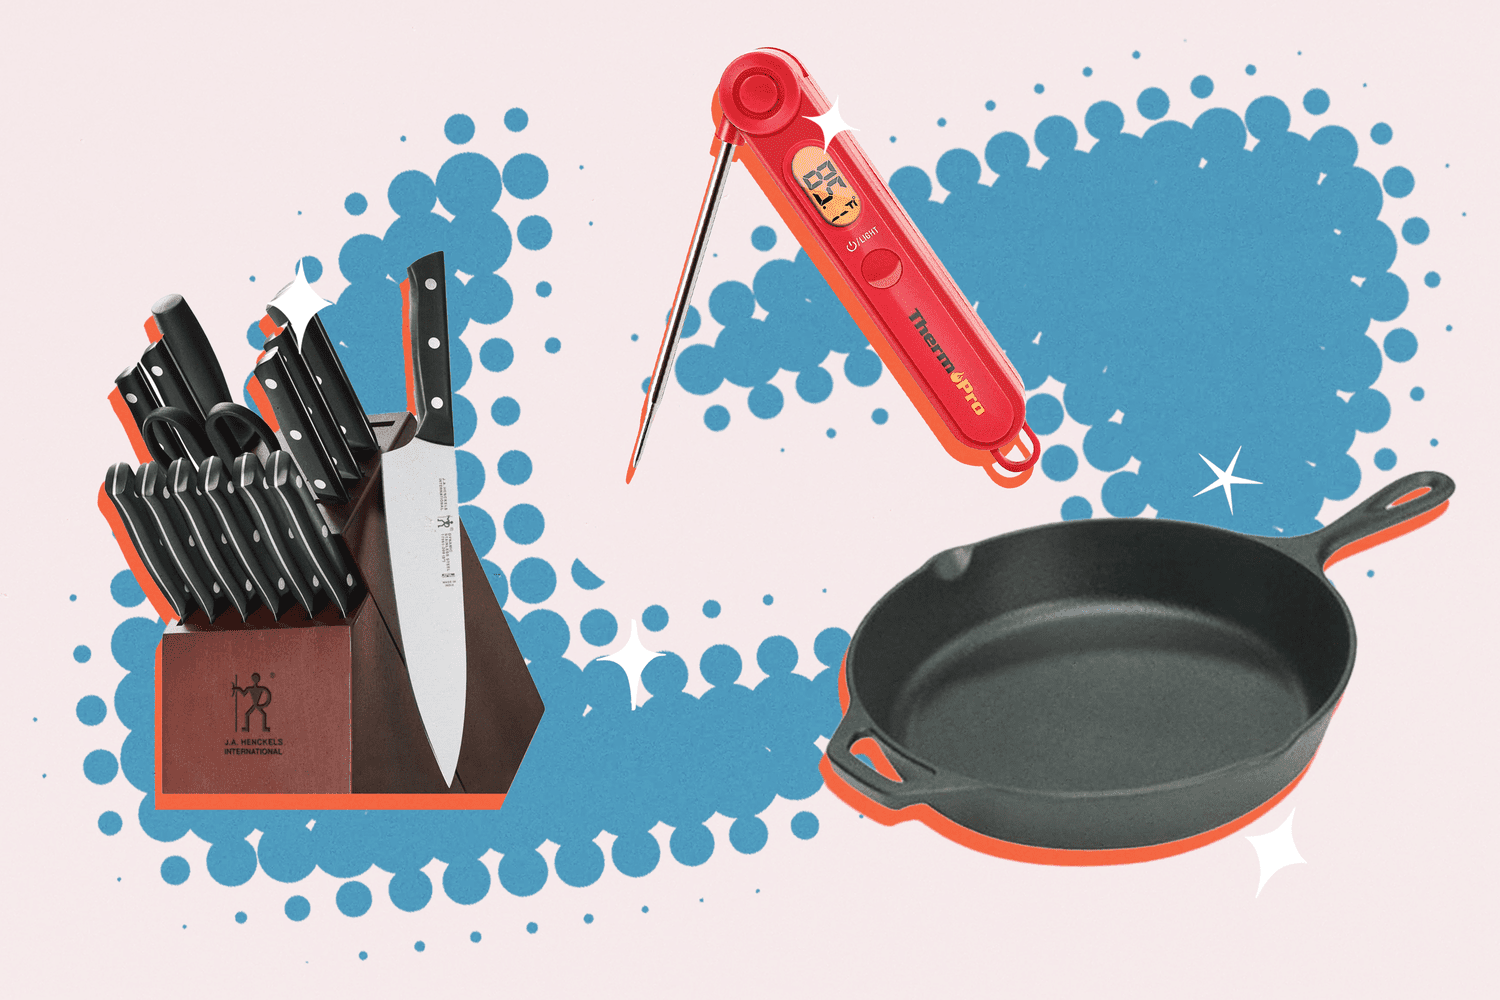 A knife block, meat thermometer, and cast iron skillet on a blue and white background